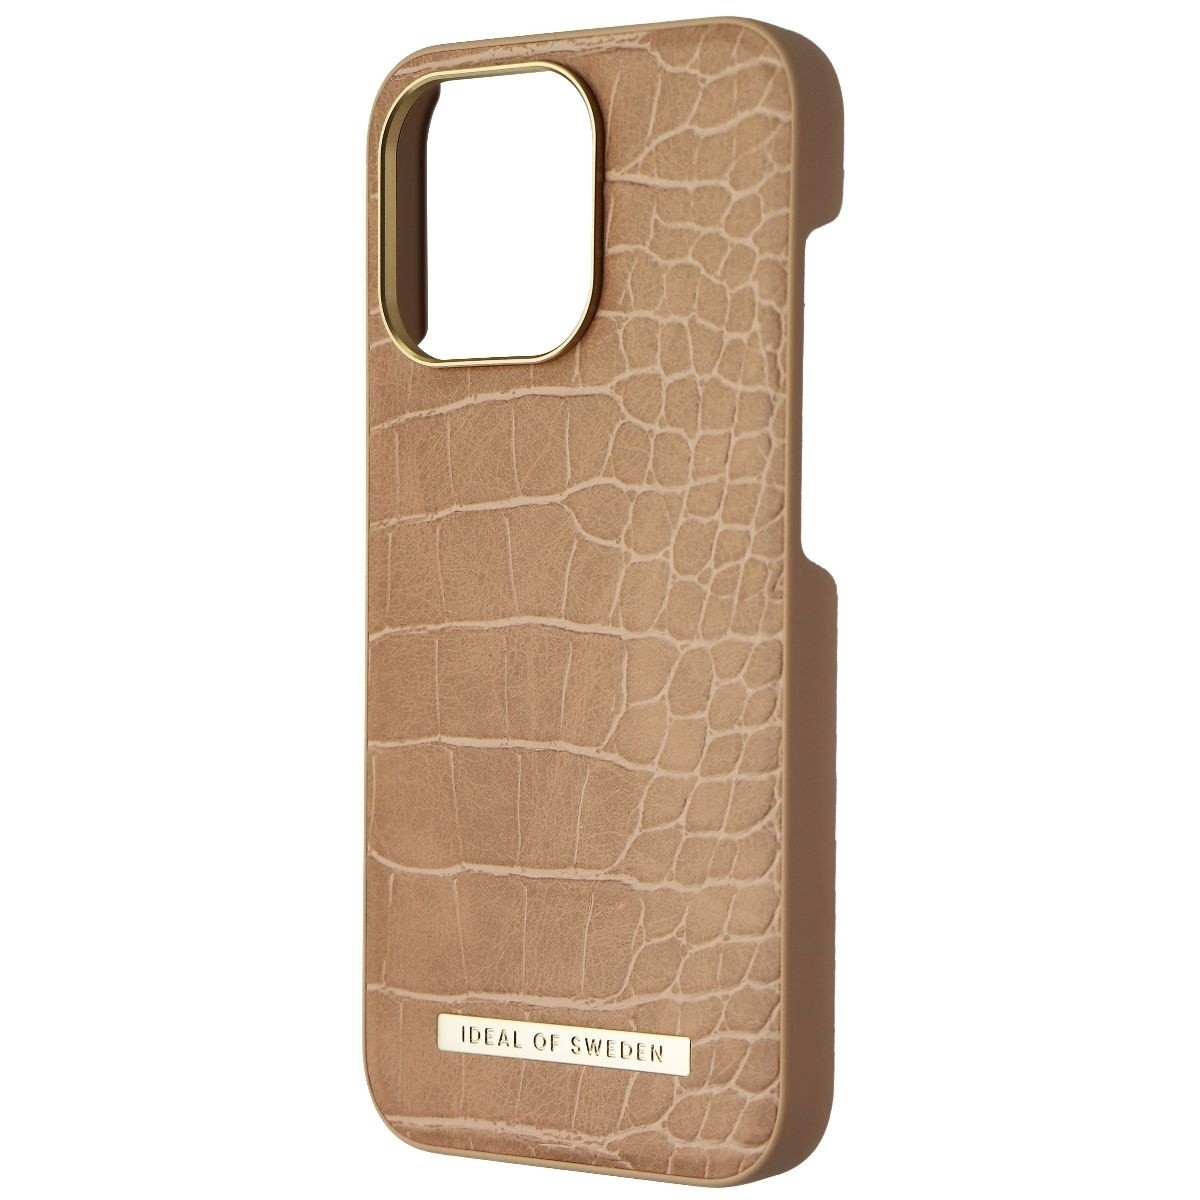 IDeal Of Sweden Hard Case For Apple IPhone 13 Pro - Camel Croco